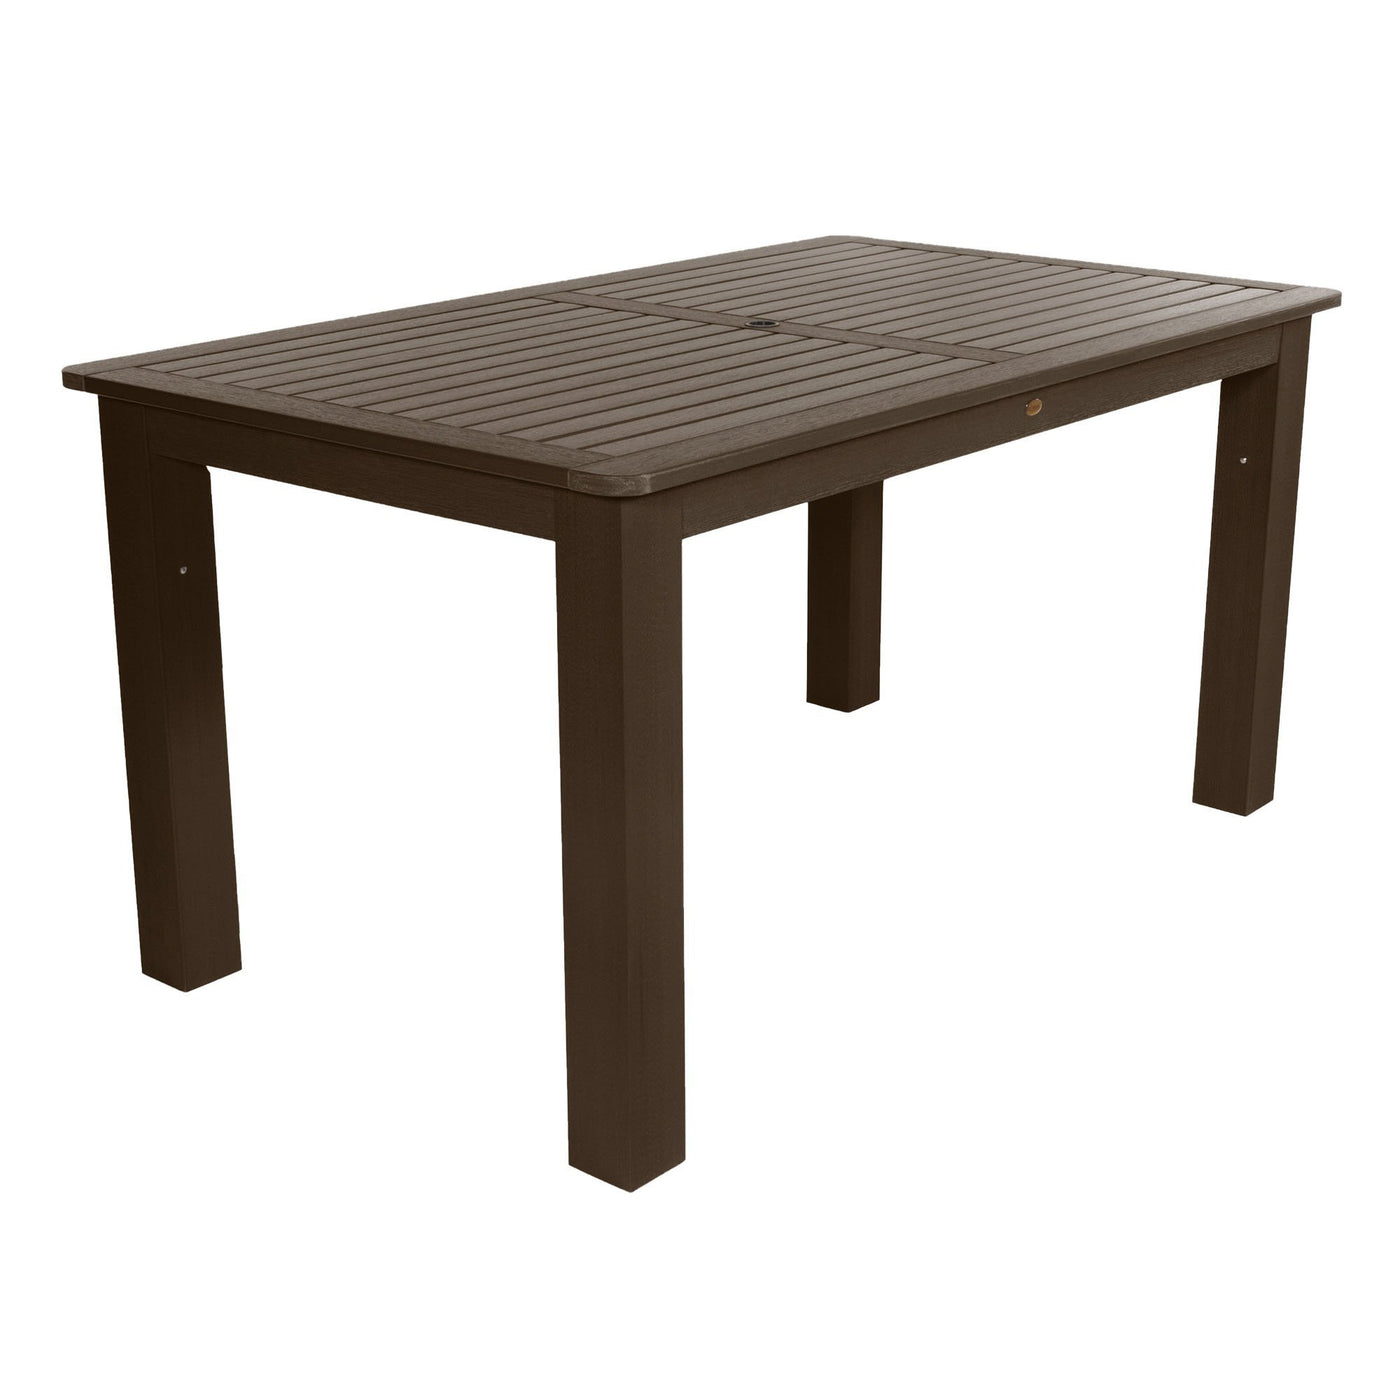 Rectangular 42in x 72in Outdoor Dining Table - Counter Height Dining Highwood USA Weathered Acorn 